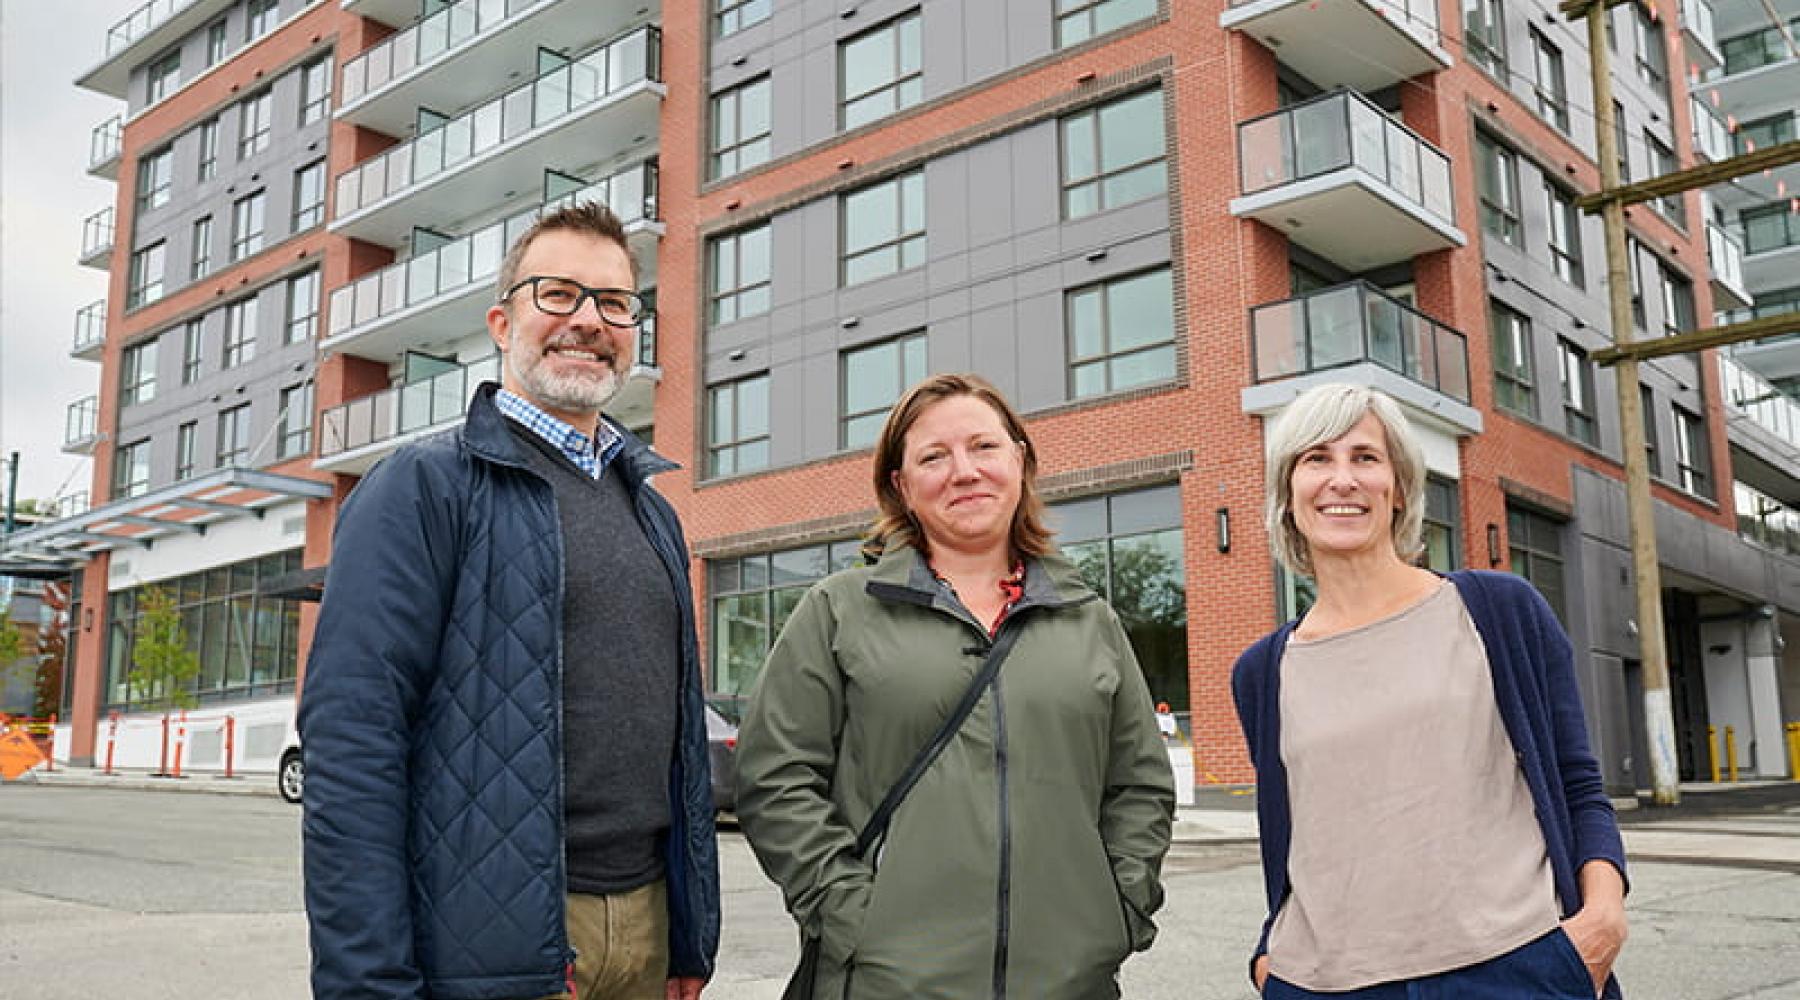 L to R: Lance Jakubec, CMHC; Kira Gerwing, former senior manager community investment, Vancity Credit Union; and, Irene Gannitsos, senior manager strategic initiatives and investment, Vancity Community Foundation outside Aspen, a 145-unit affordable housing development in Vancouver’s Mount Pleasant neighbourhood.